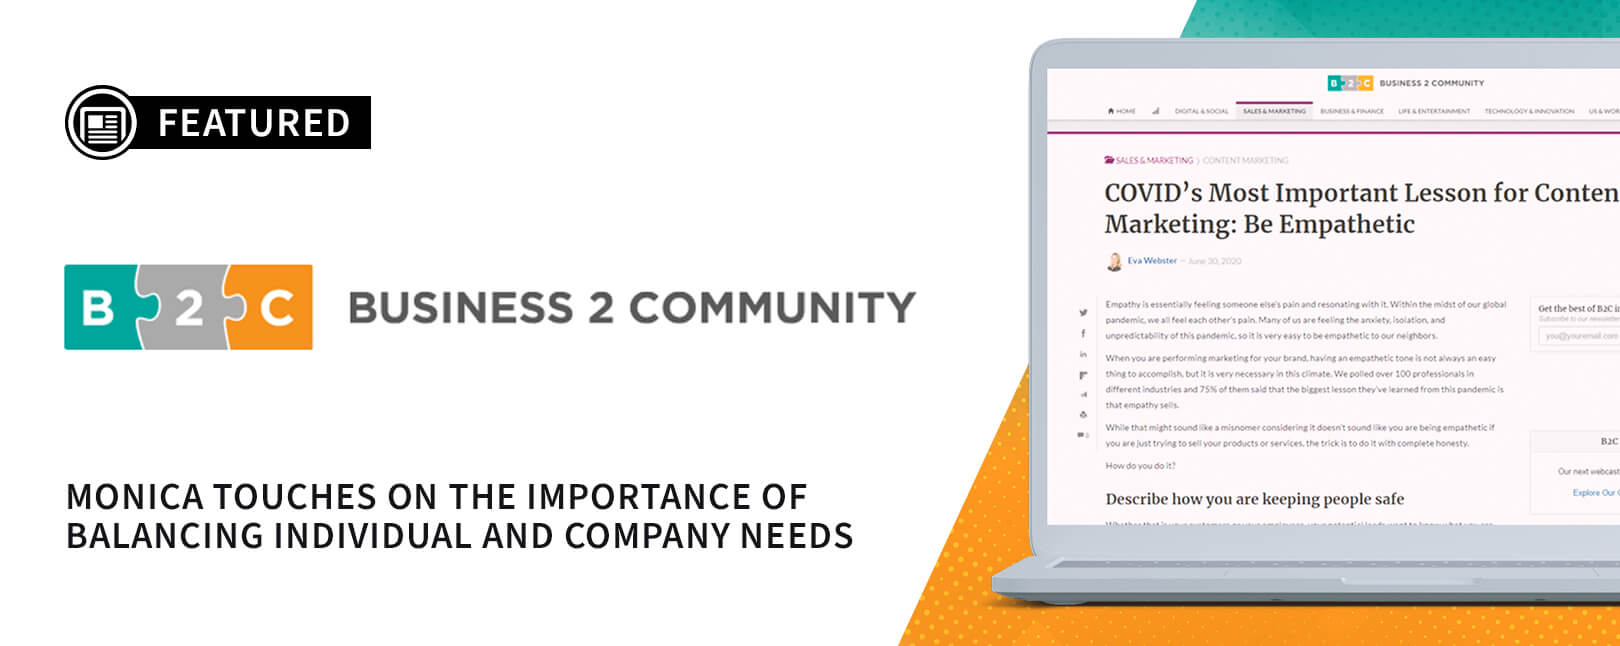 Chargebacks911® COO Recommends Empathetic COVID-19 Response in Business2Community Feature